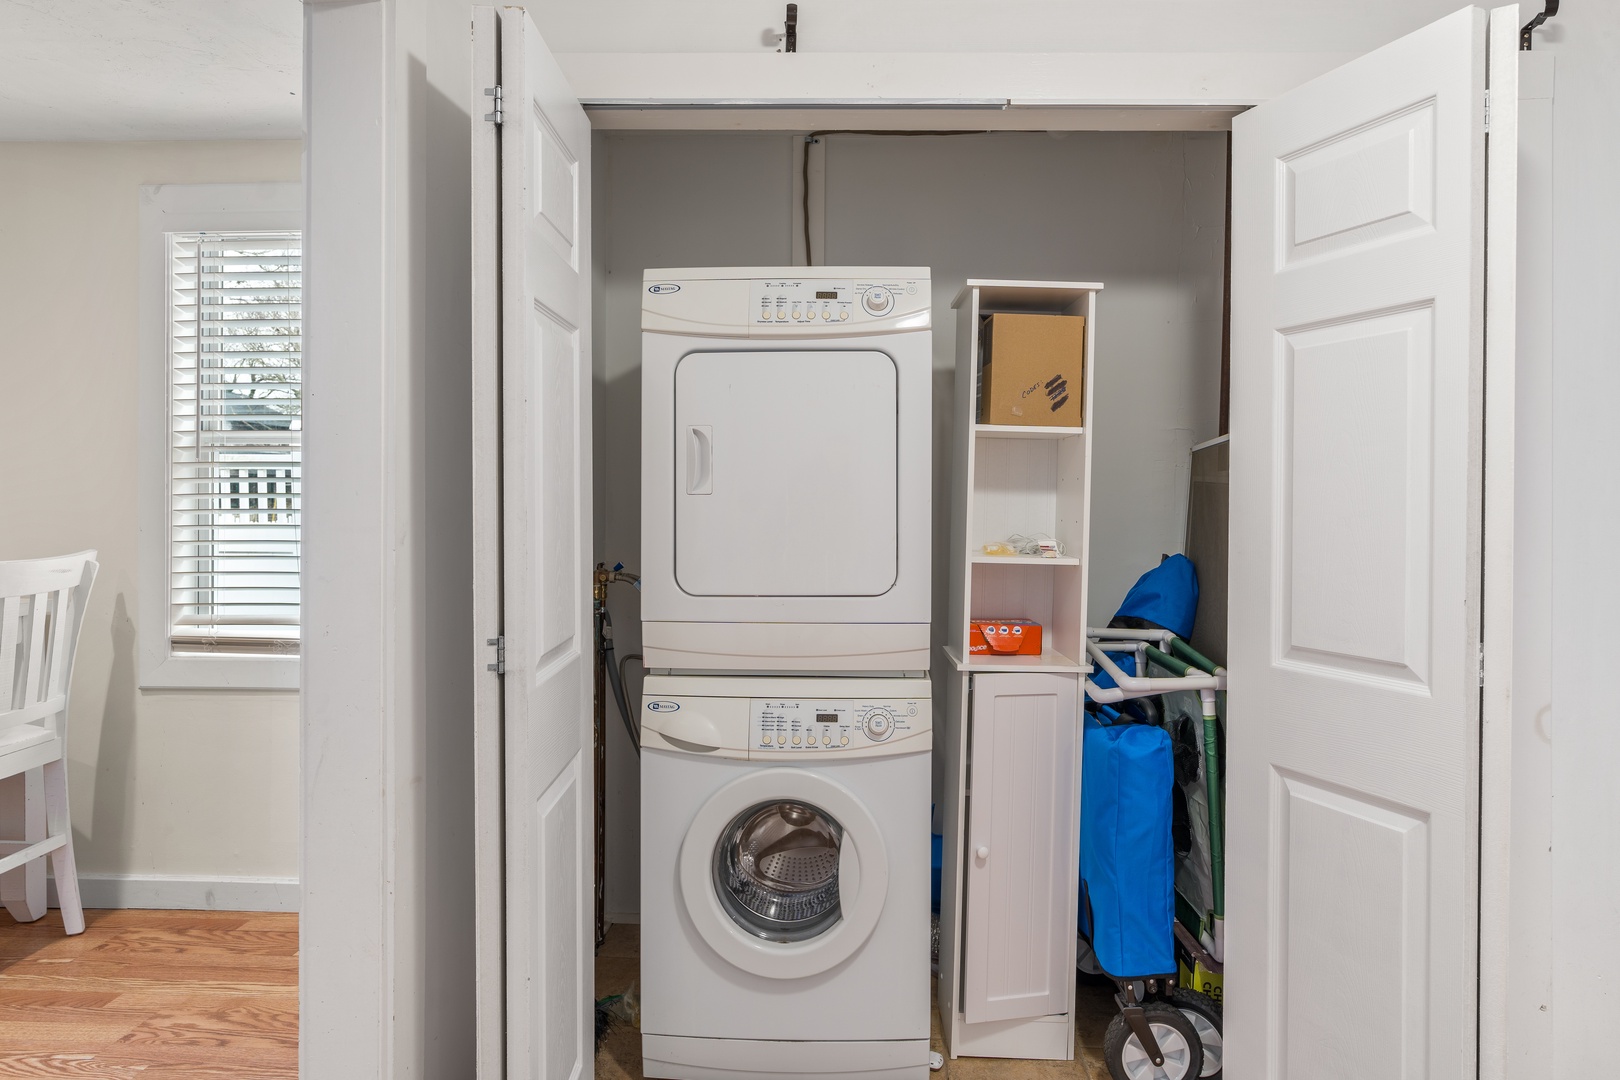 Private laundry is available for your stay, tucked away near the kitchen